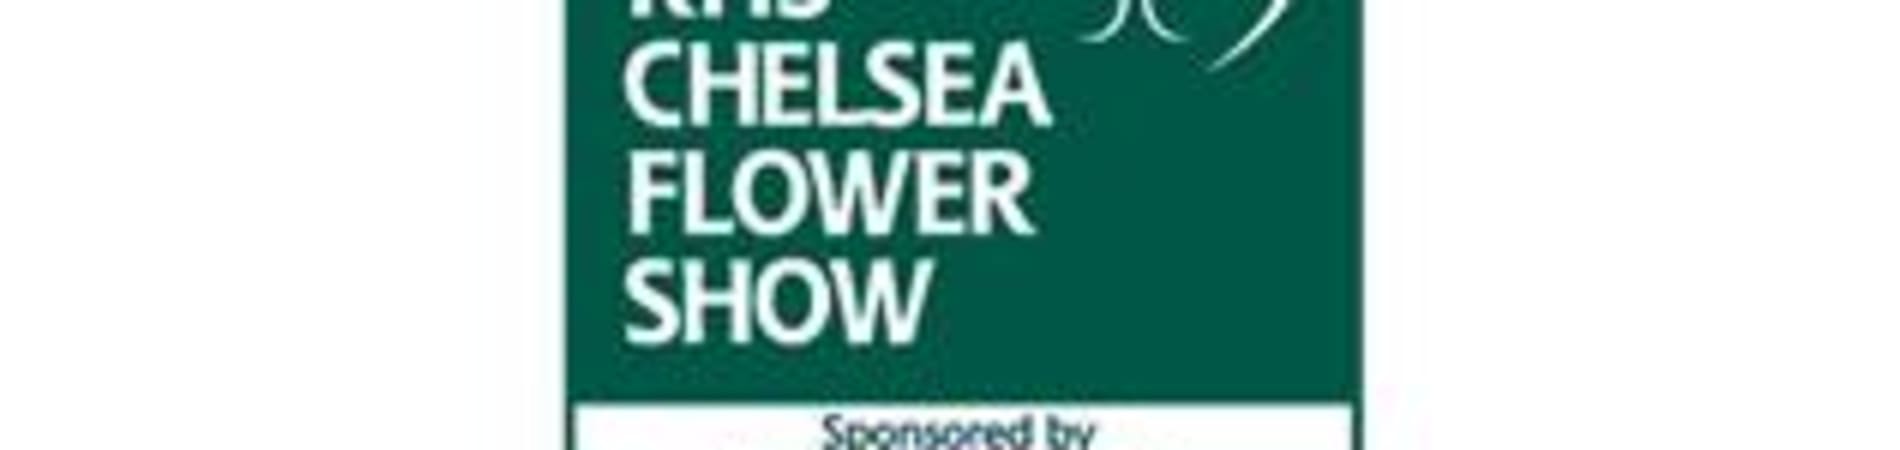 Marshalls, hard landscaping at RHS Chelsea, Stand EA60